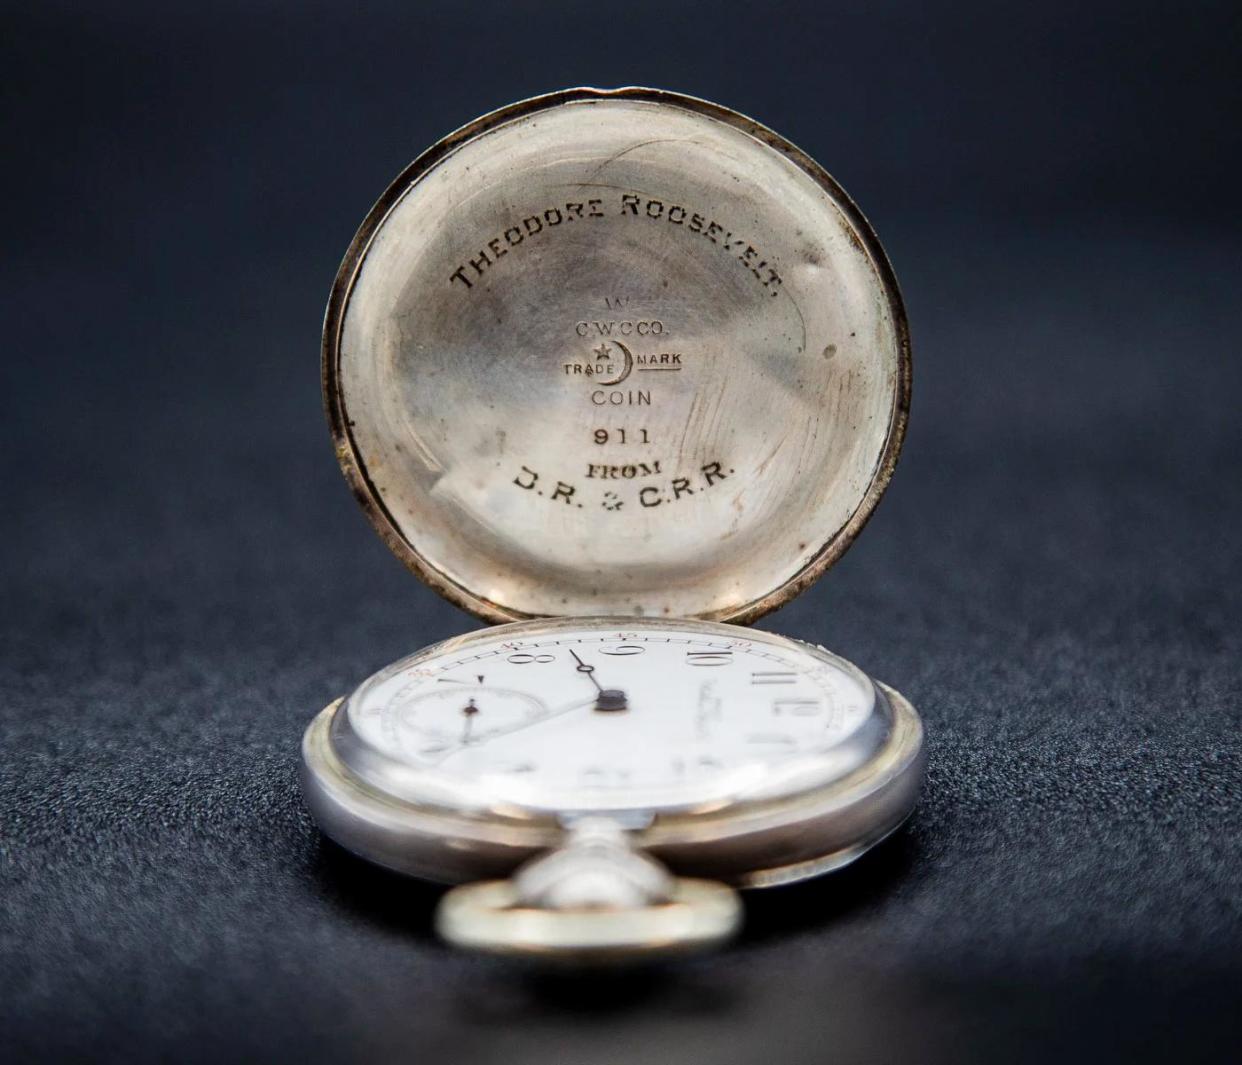 <span>The watch reportedly traveled thousands of miles with Roosevelt, who took it on trips across the world during his presidency.</span><span>Photograph: Jason Wickersty/NPS</span>